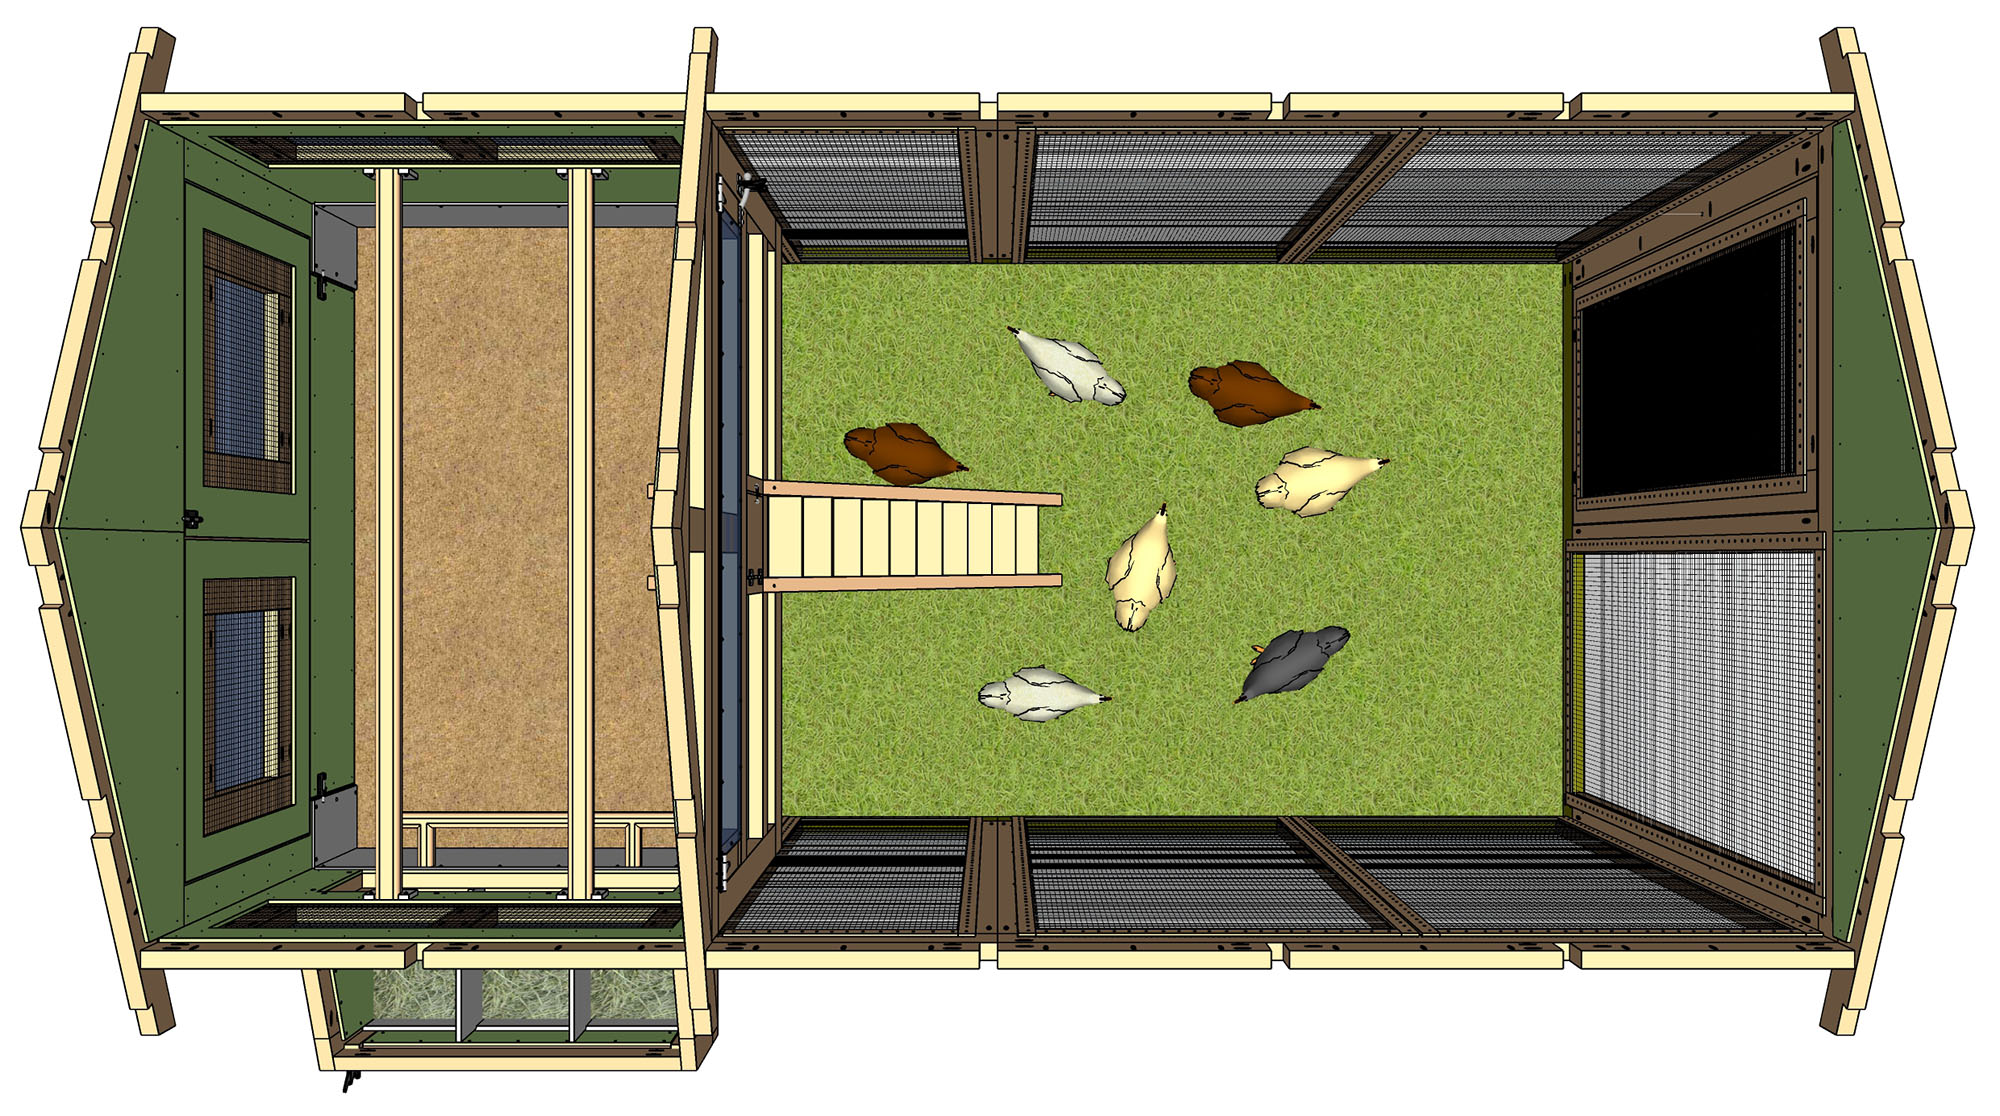 Overhead view shows 7 chickens in the run of a 6'x12' American Coop